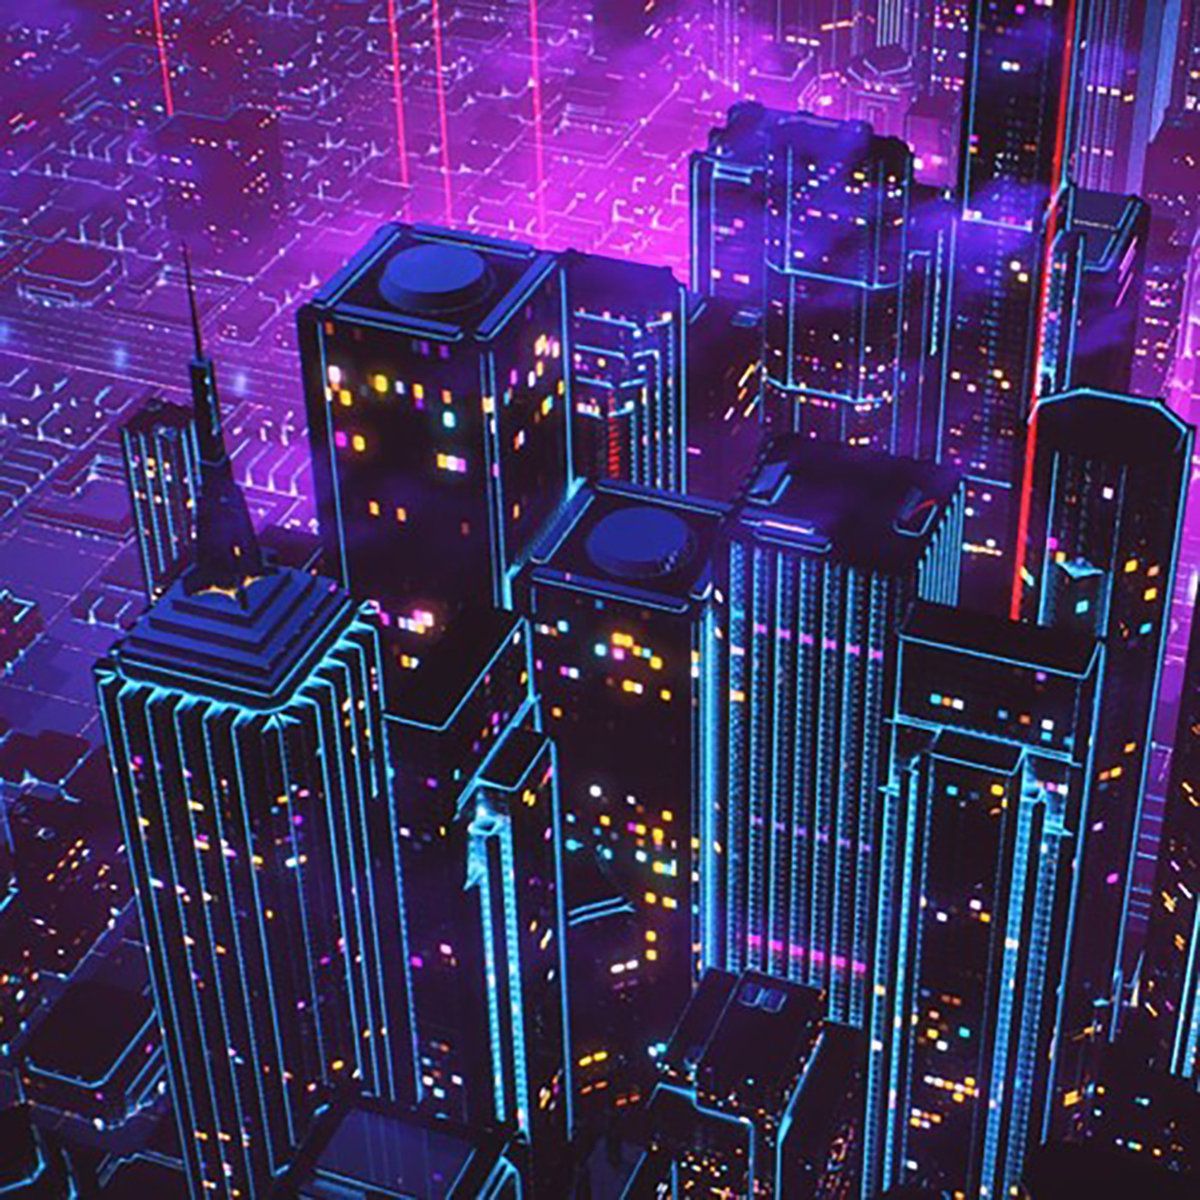 Planet City cover art by Wice Synthwave, retro future, neon city